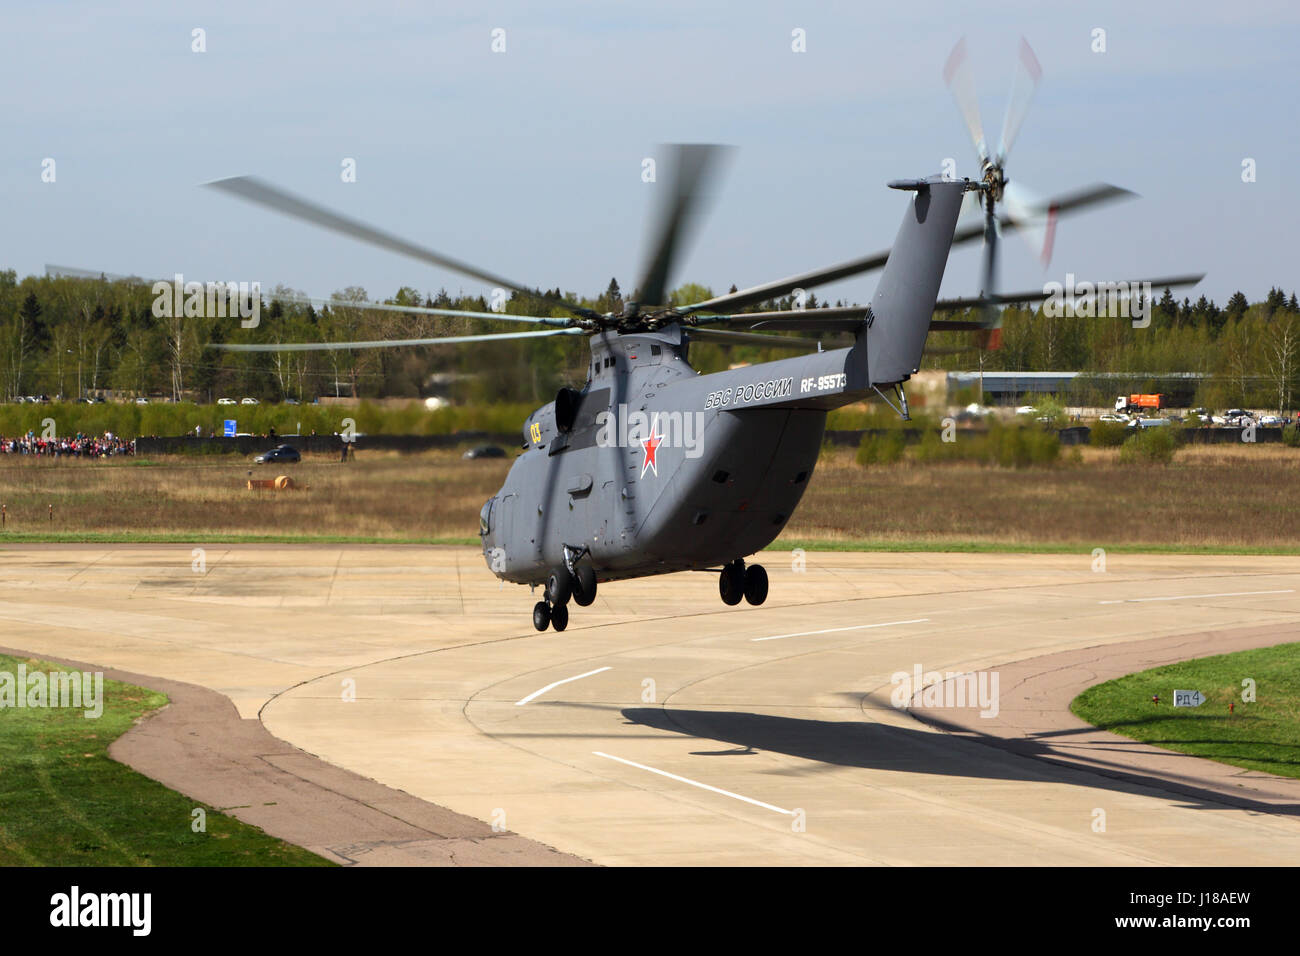 KUBINKA, MOSCOW REGION, RUSSIA - MAY 9, 2015: Mil Mi-26 RF-95573 helicopter of russian air force pictured departing Kubinka air force base on a victor Stock Photo